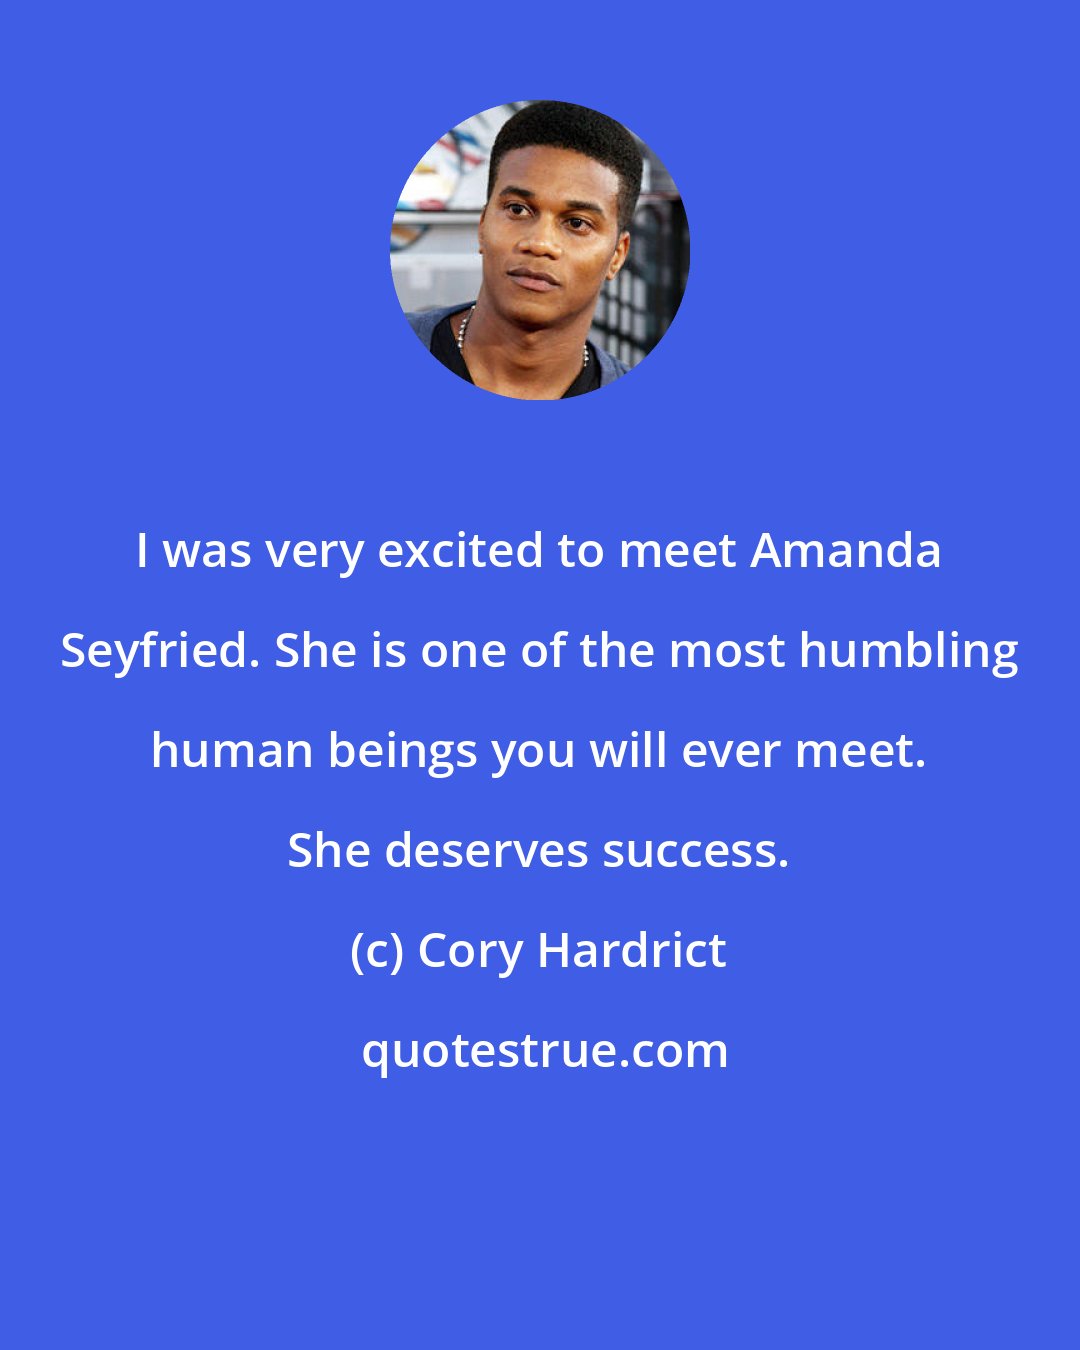 Cory Hardrict: I was very excited to meet Amanda Seyfried. She is one of the most humbling human beings you will ever meet. She deserves success.